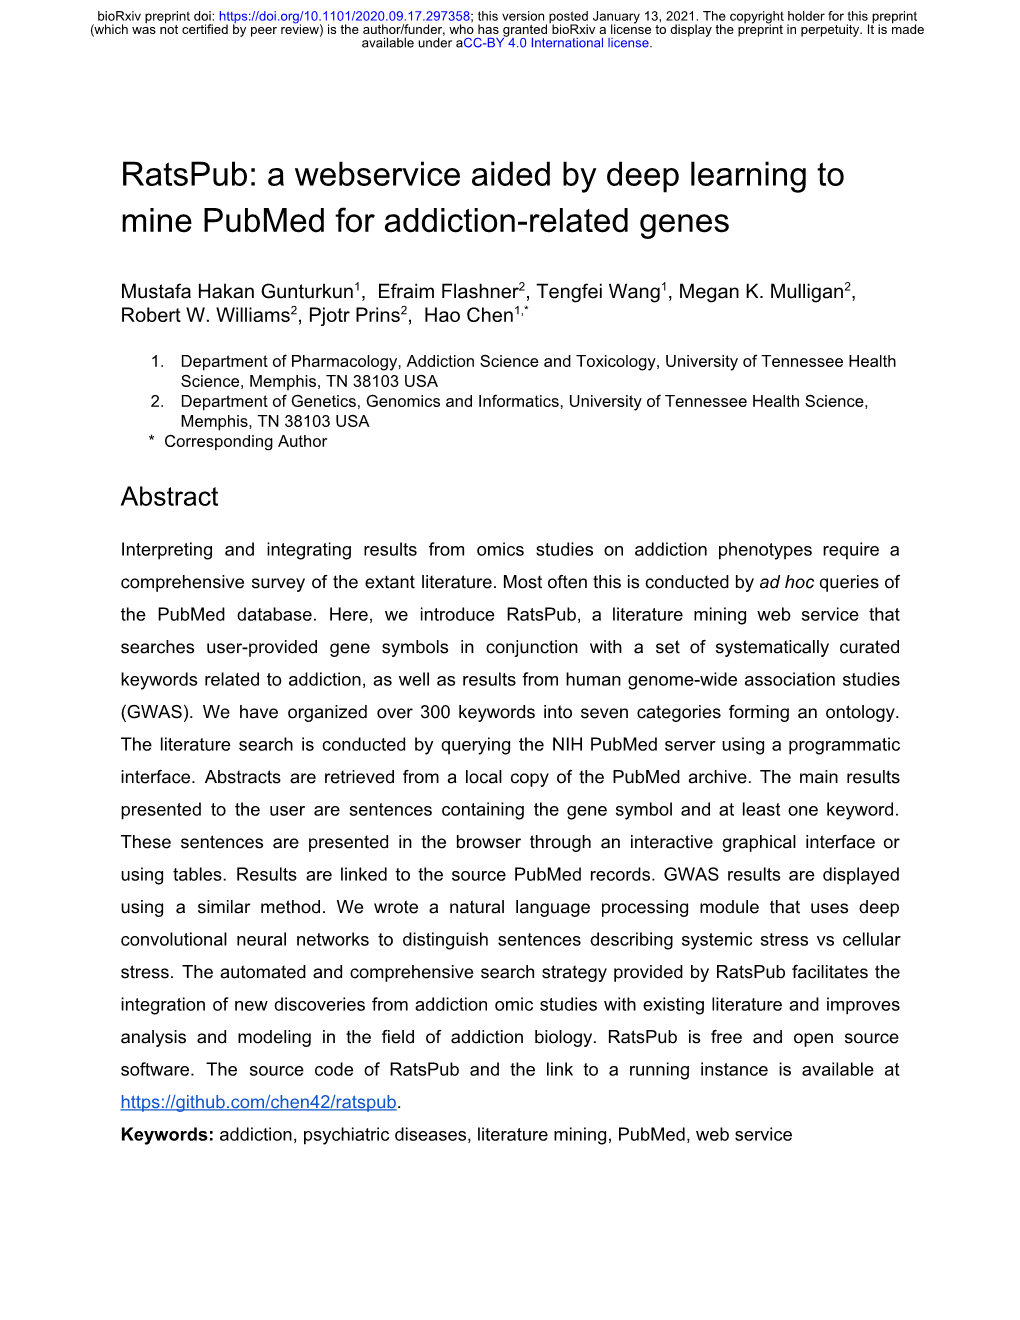 A Webservice Aided by Deep Learning to Mine Pubmed for Addiction-Related Genes